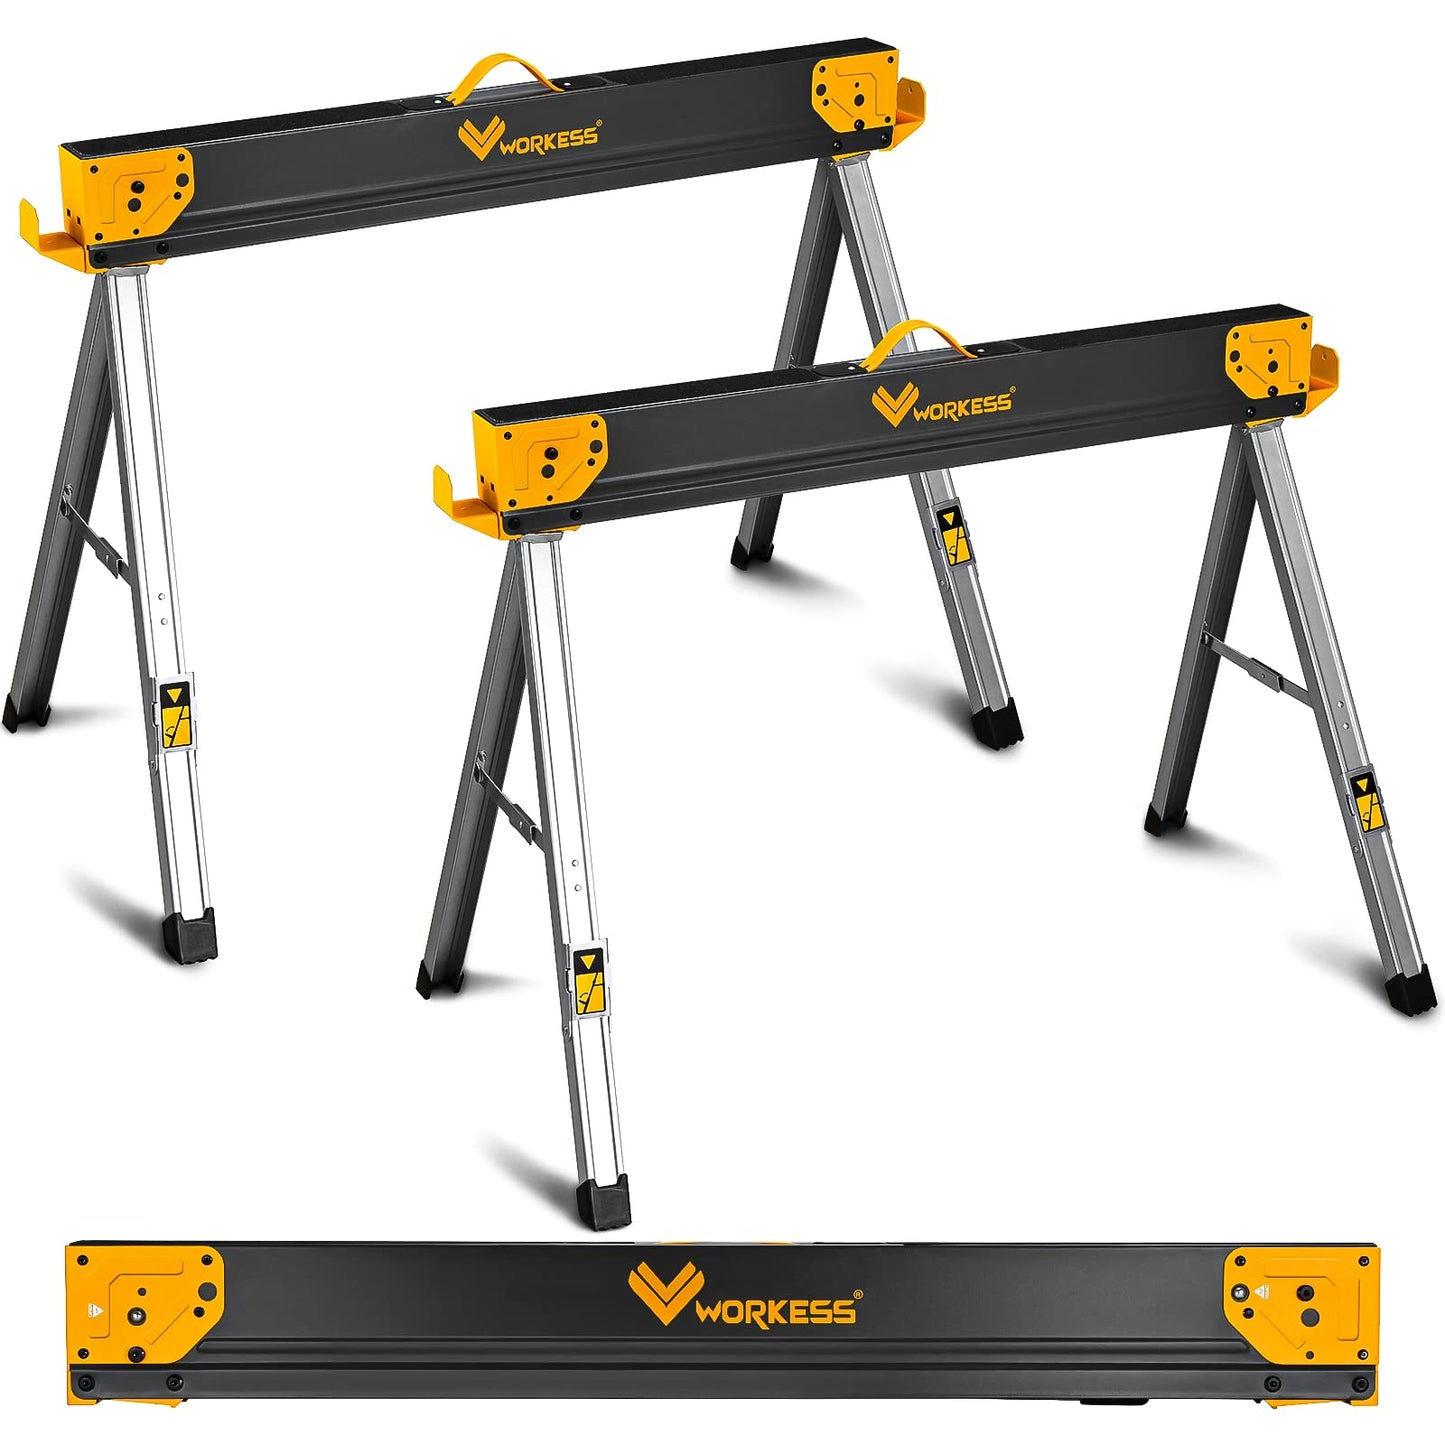 WORKESS Saw Horses 2 Pack Folding, Heavy Duty Sawhorse Table 2600 Lbs Load Capacity with 2x4 Support Legs, Portable Folding and Fast Open Legs and